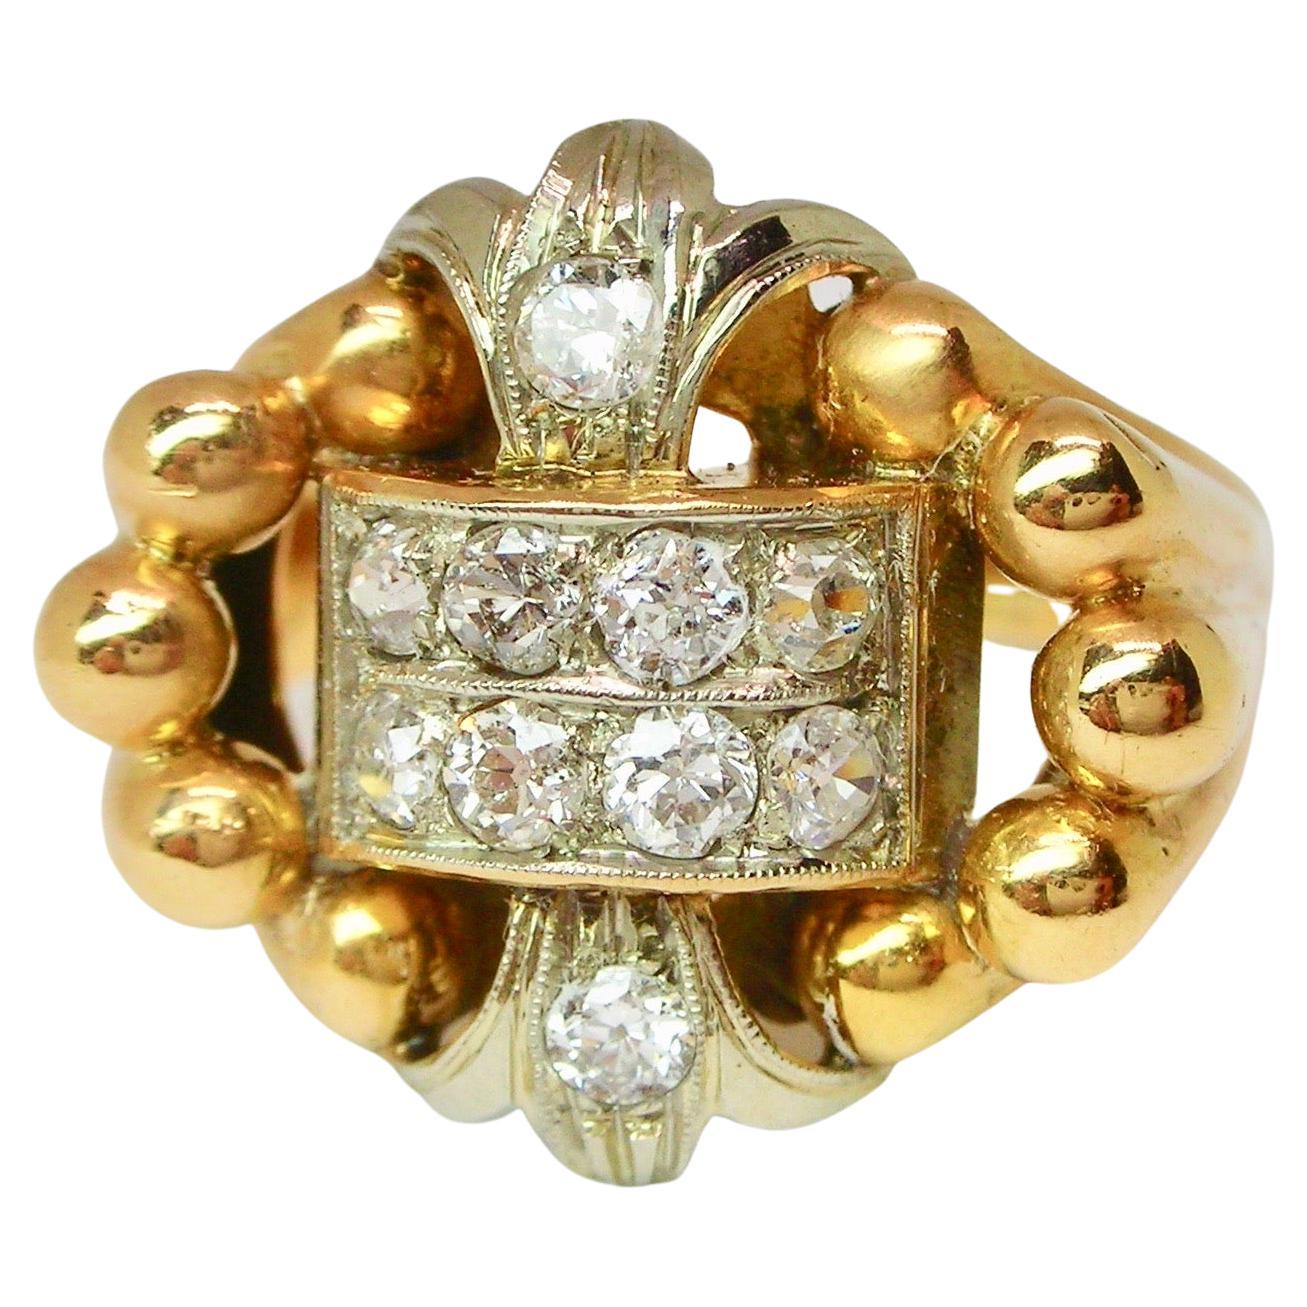 1950s Gold and Diamonds Cocktail Ring